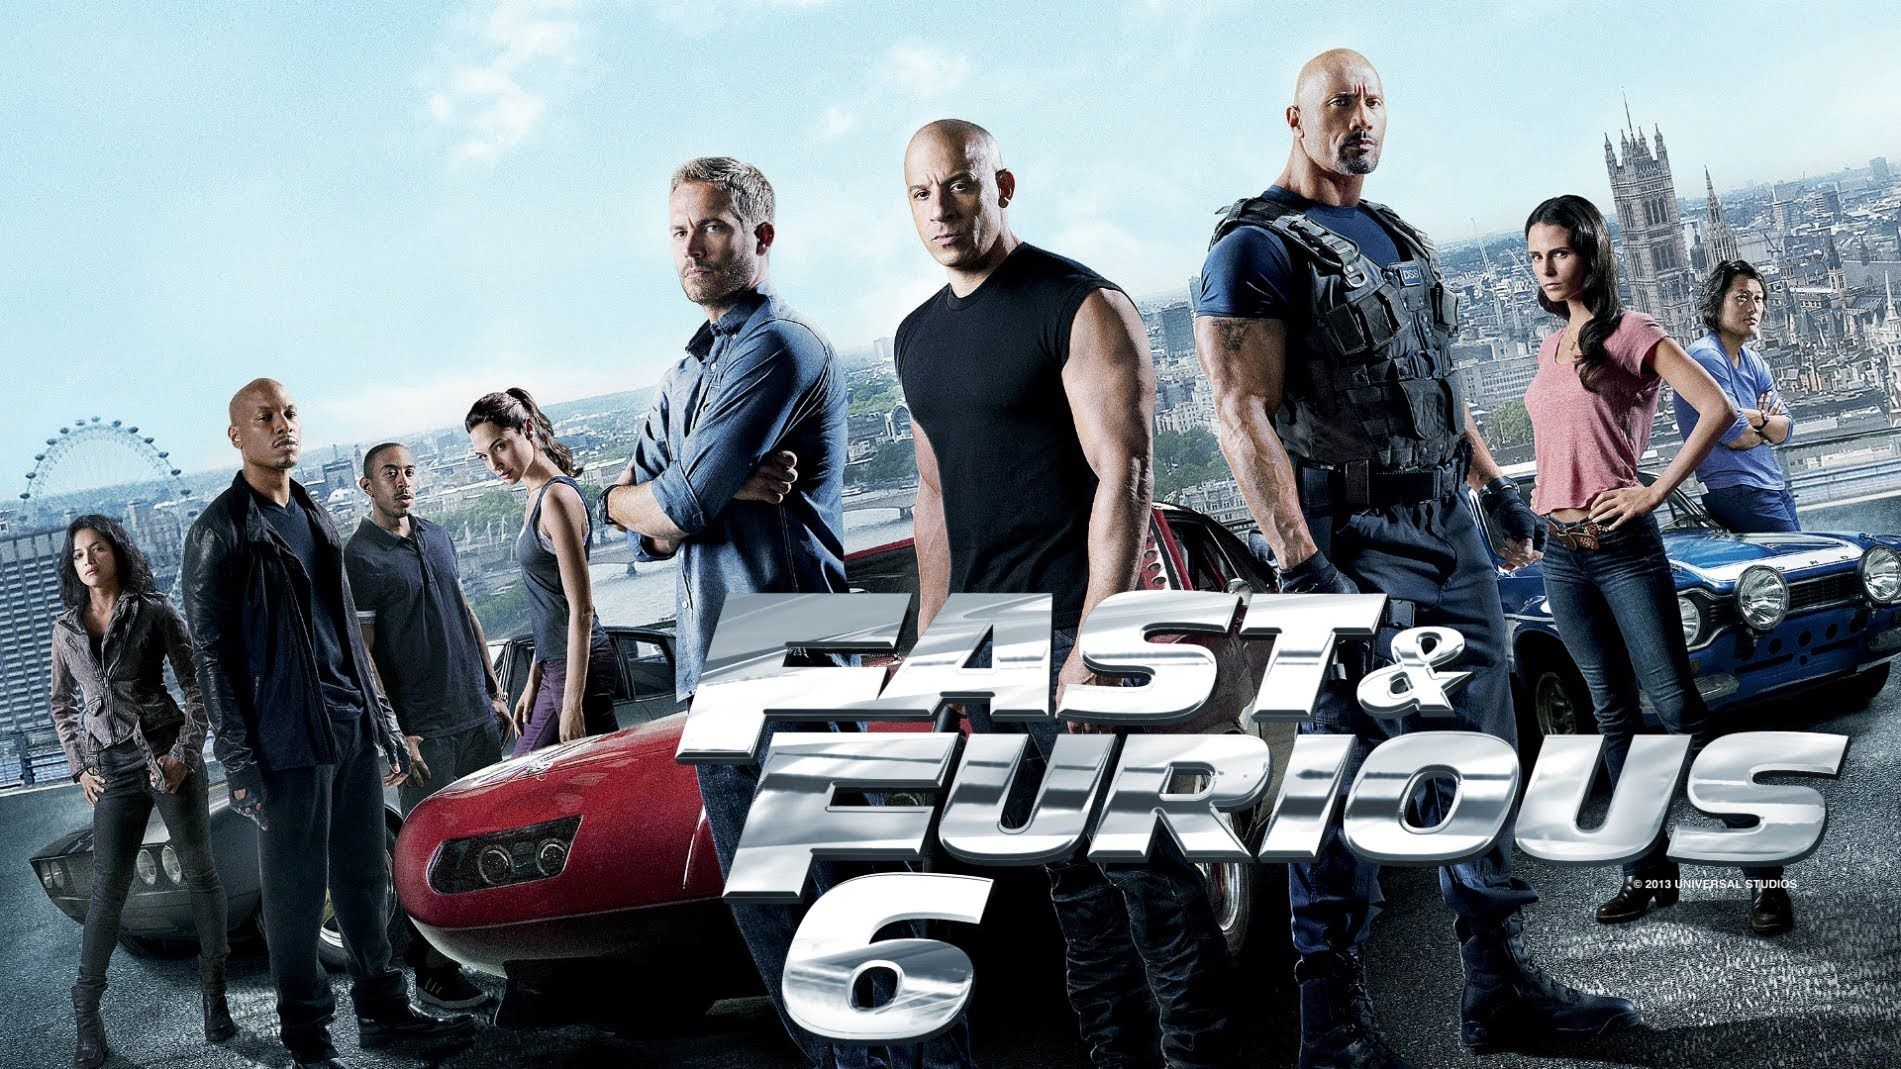 Fast & Furious 6 wallpaper, Movie, HQ Fast & Furious 6 picture